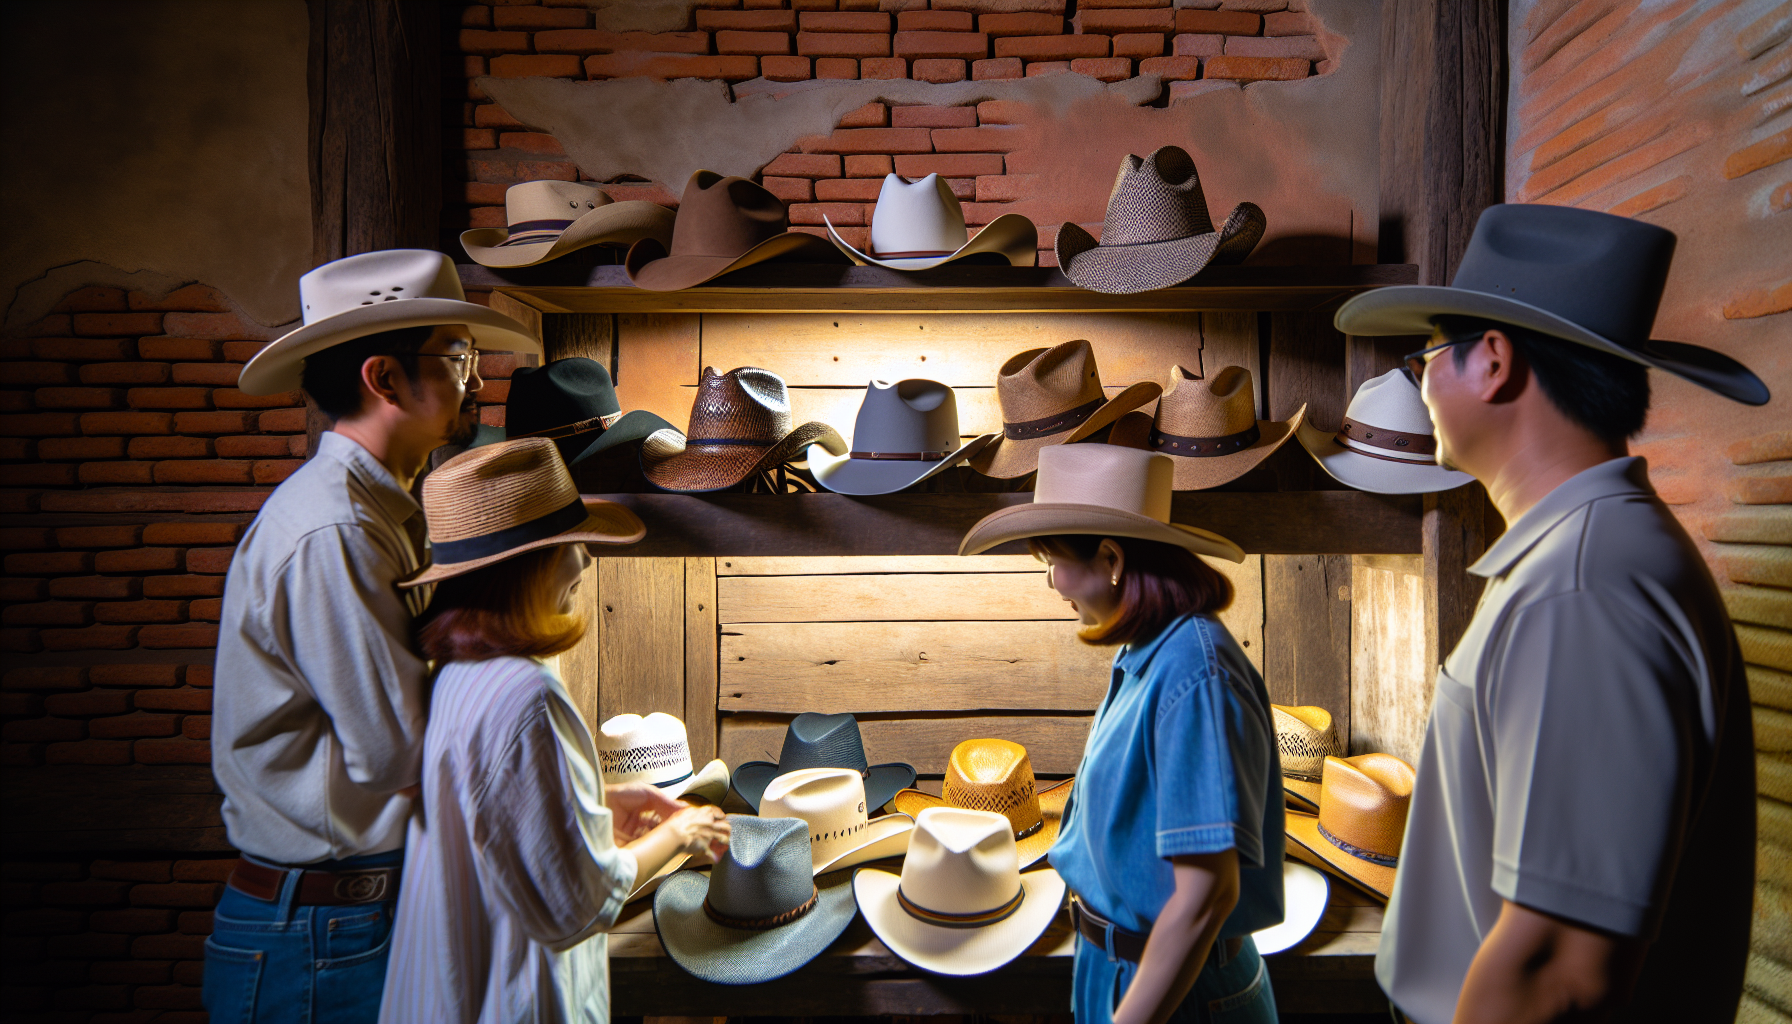 Variety of western hats including cowboy hats and straw hats